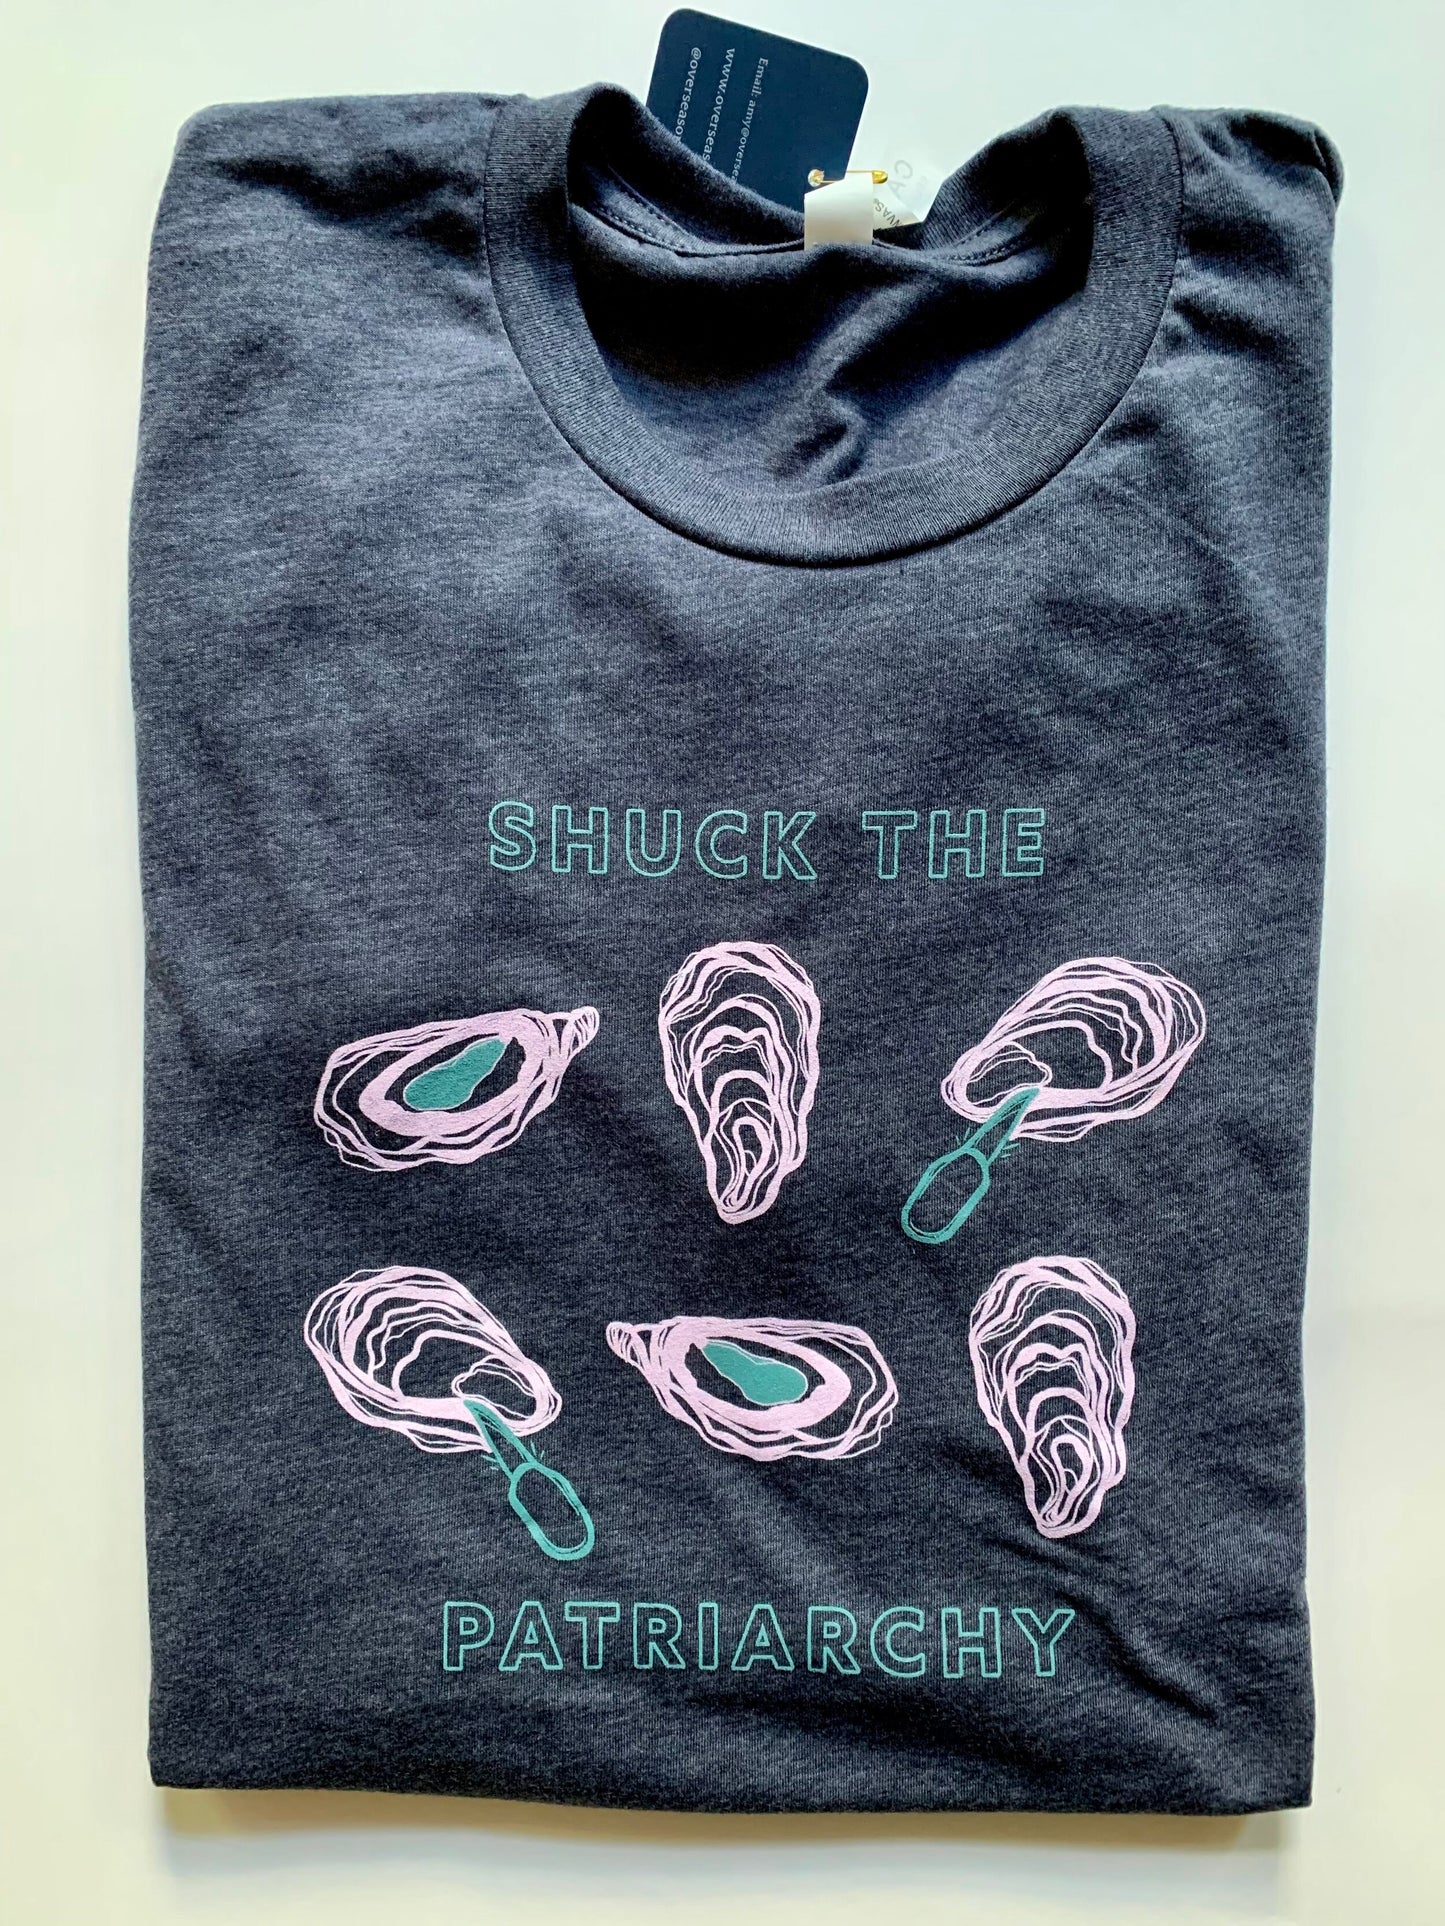 A folded heather navy tee with "Shuck the Patriarchy" in block letters and oyster designs